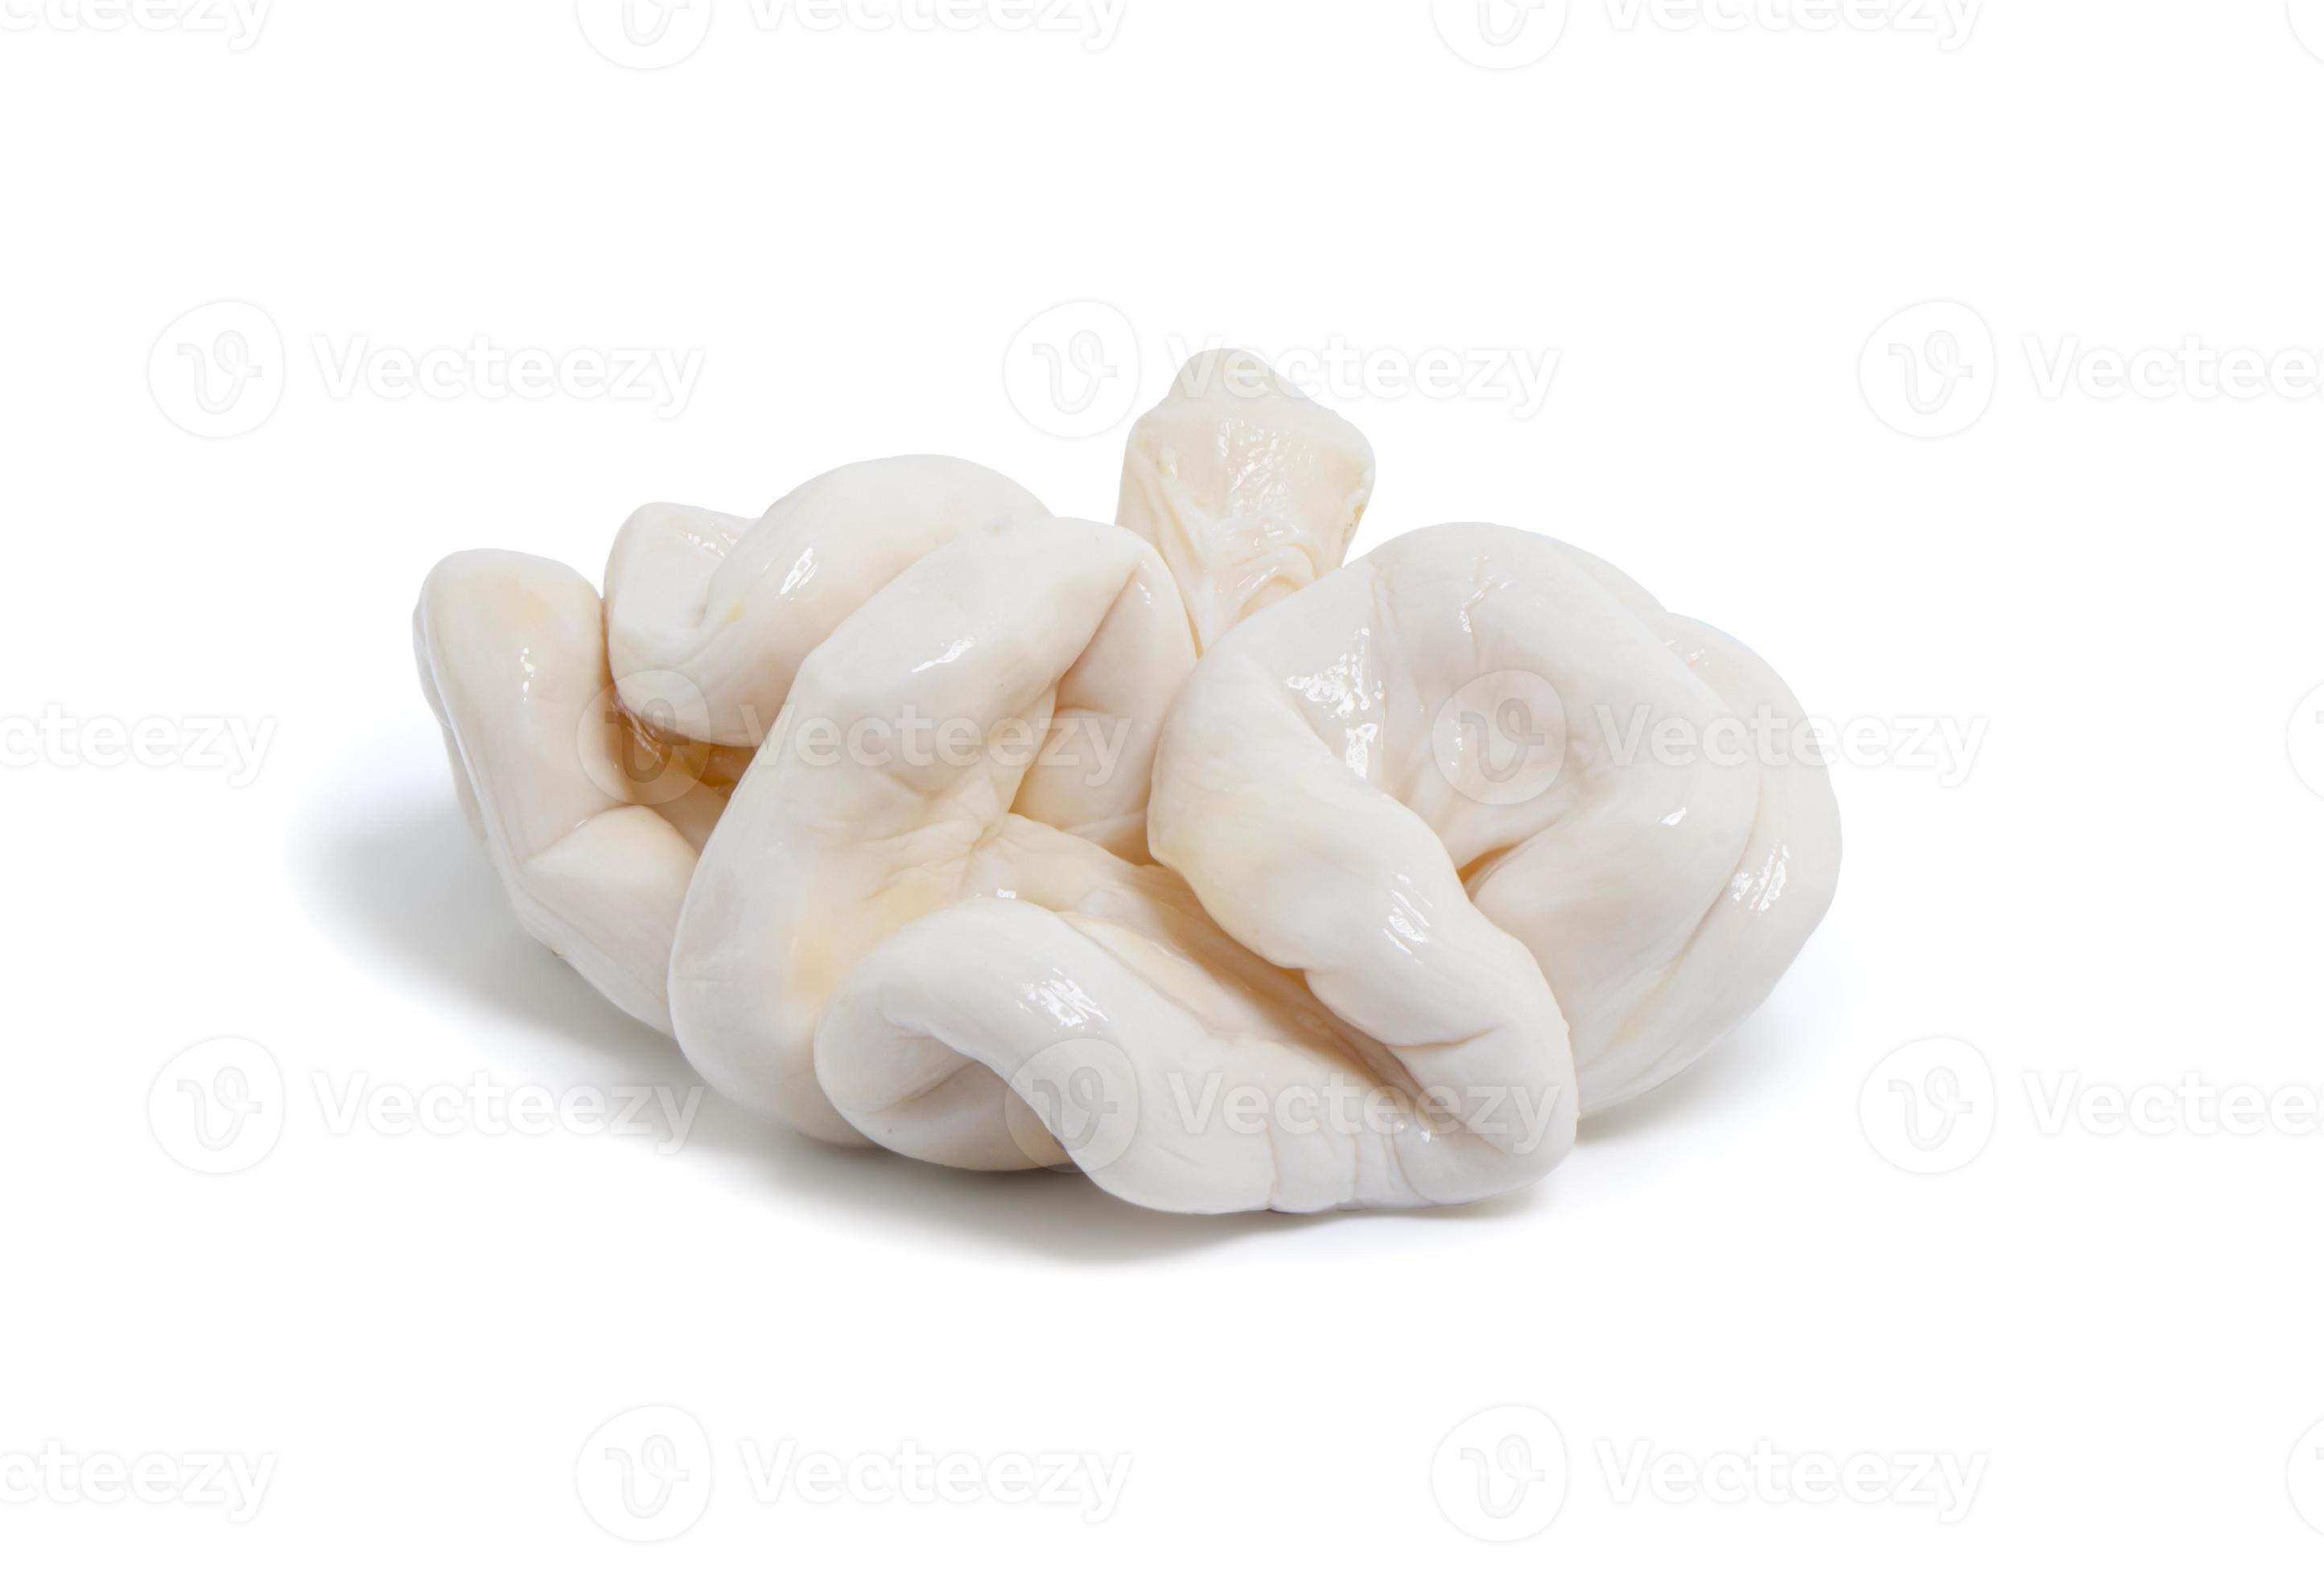 https://static.vecteezy.com/system/resources/previews/002/009/161/large_2x/pork-small-intestine-or-chitterlings-on-white-background-photo.jpg